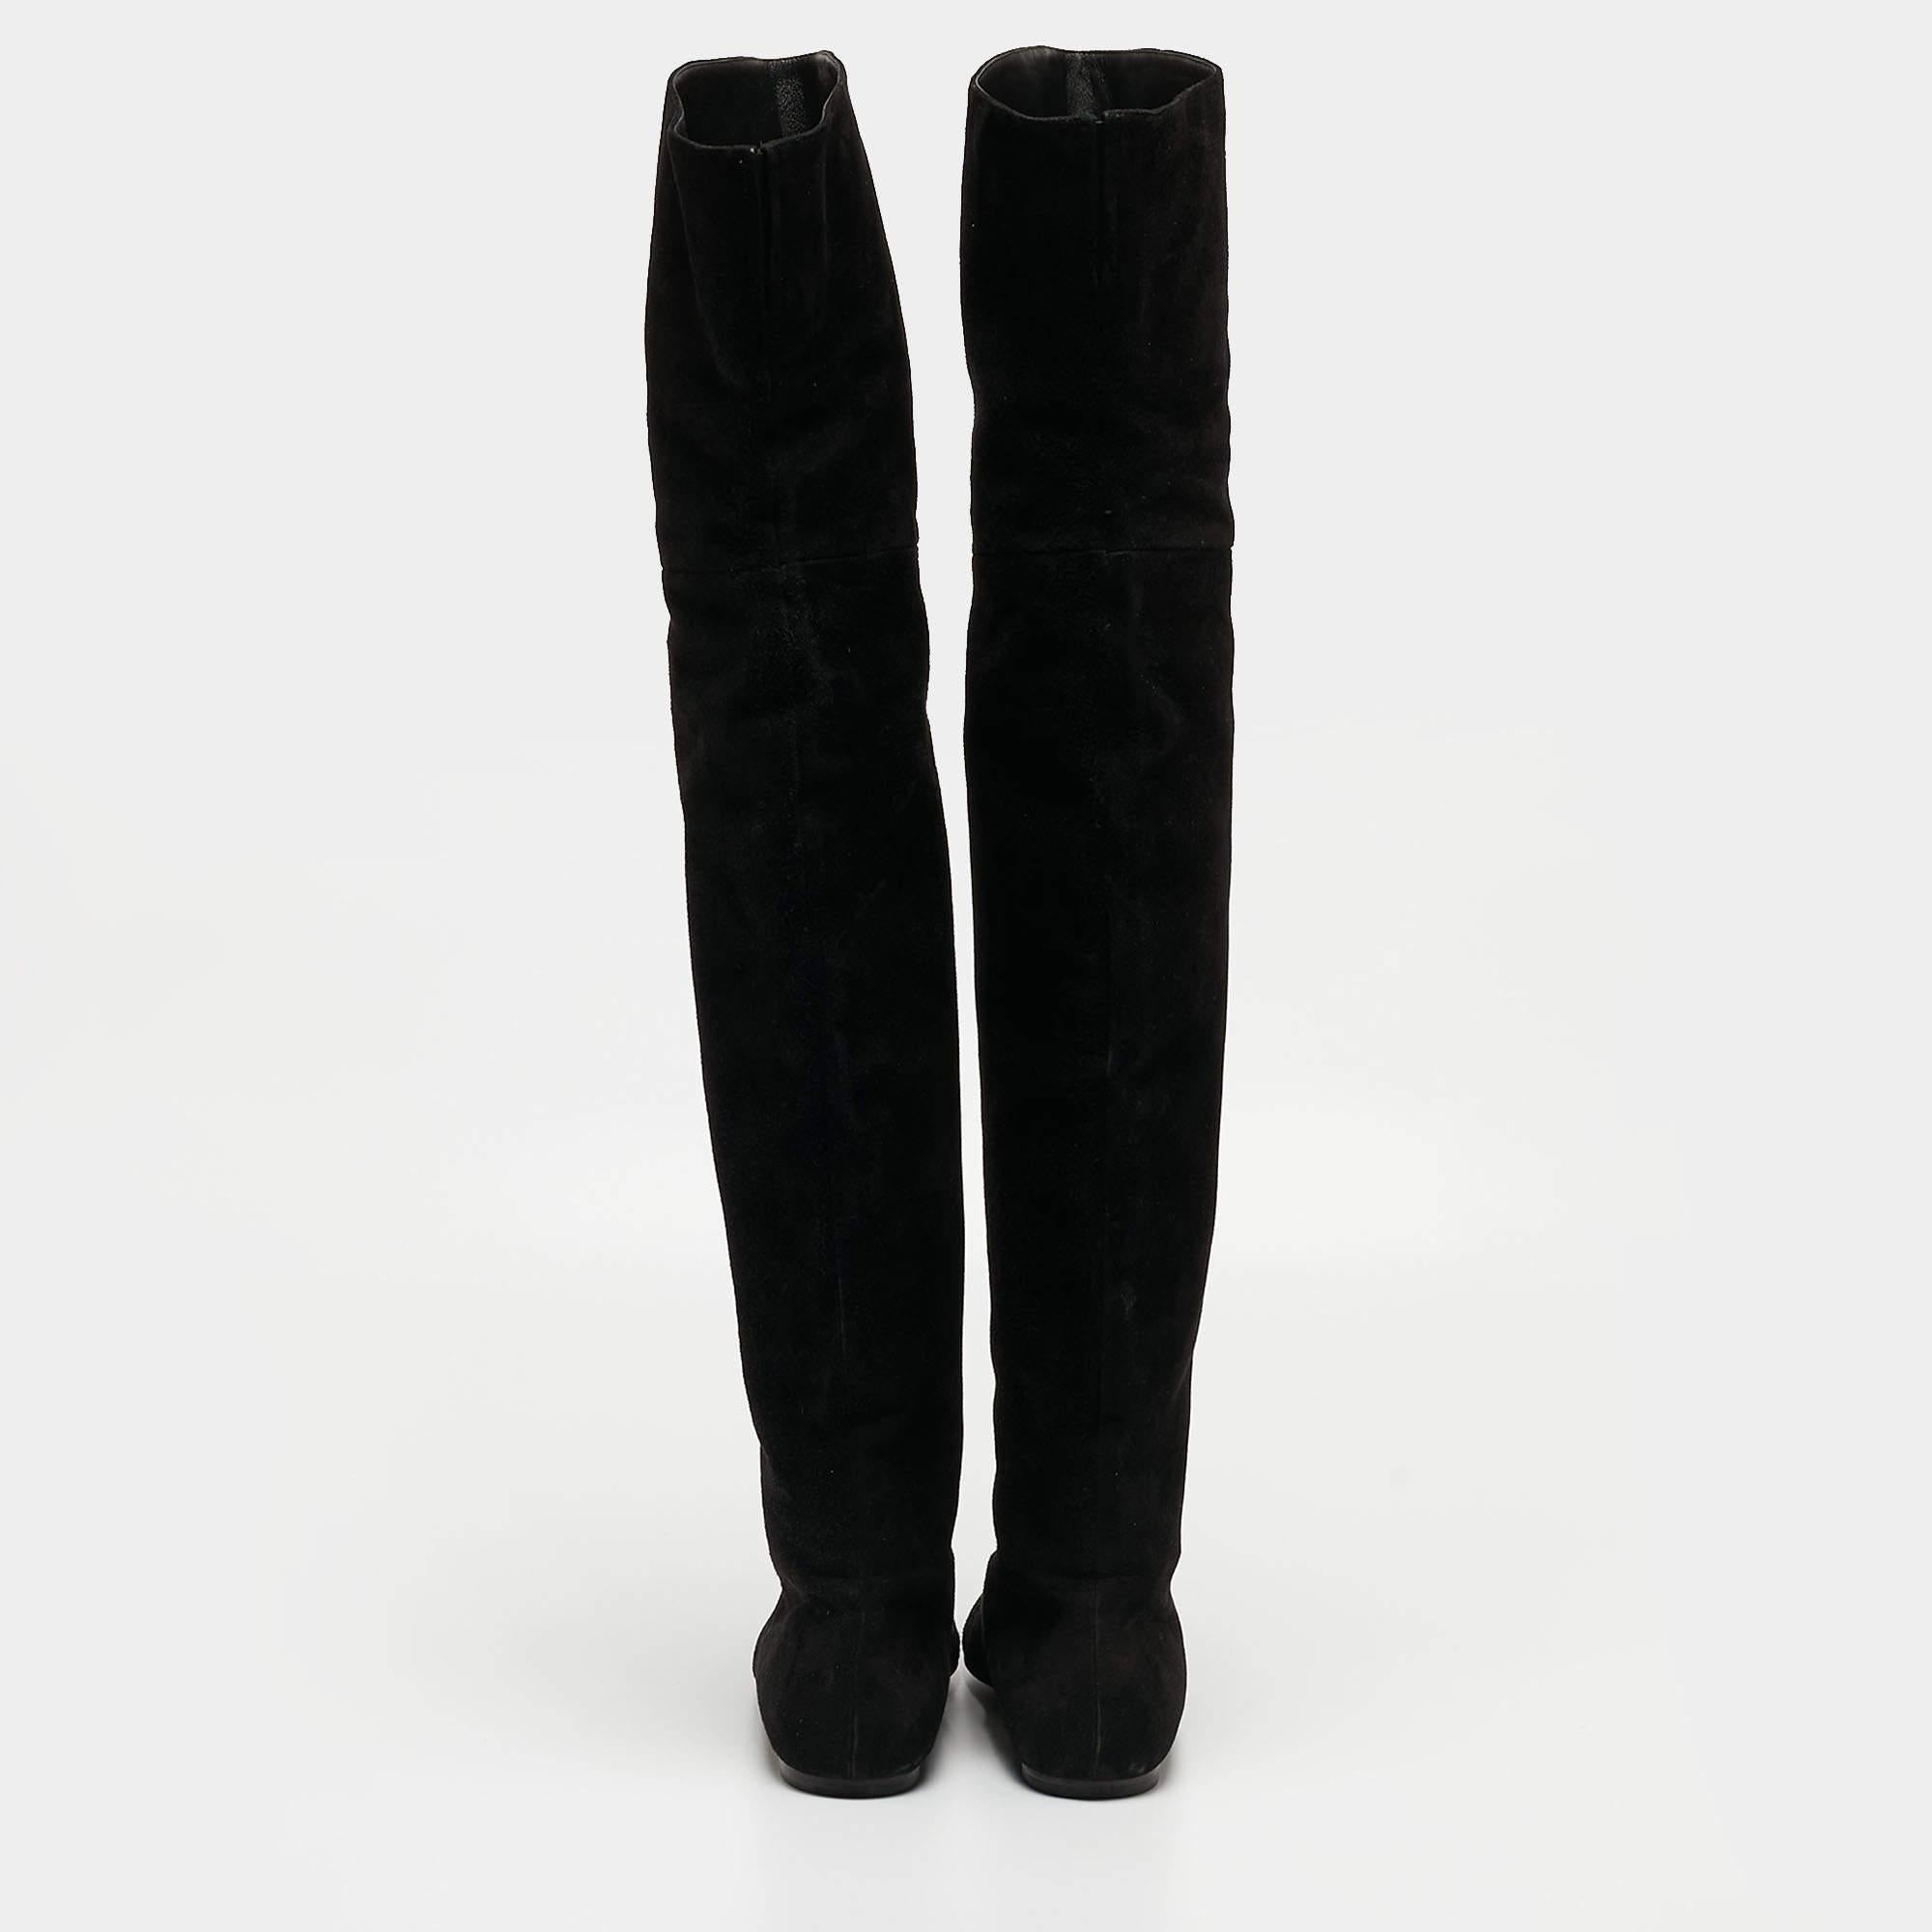 Dolce & Gabbana Black Suede Over The Knee Boots Size 37.5 In Good Condition For Sale In Dubai, Al Qouz 2